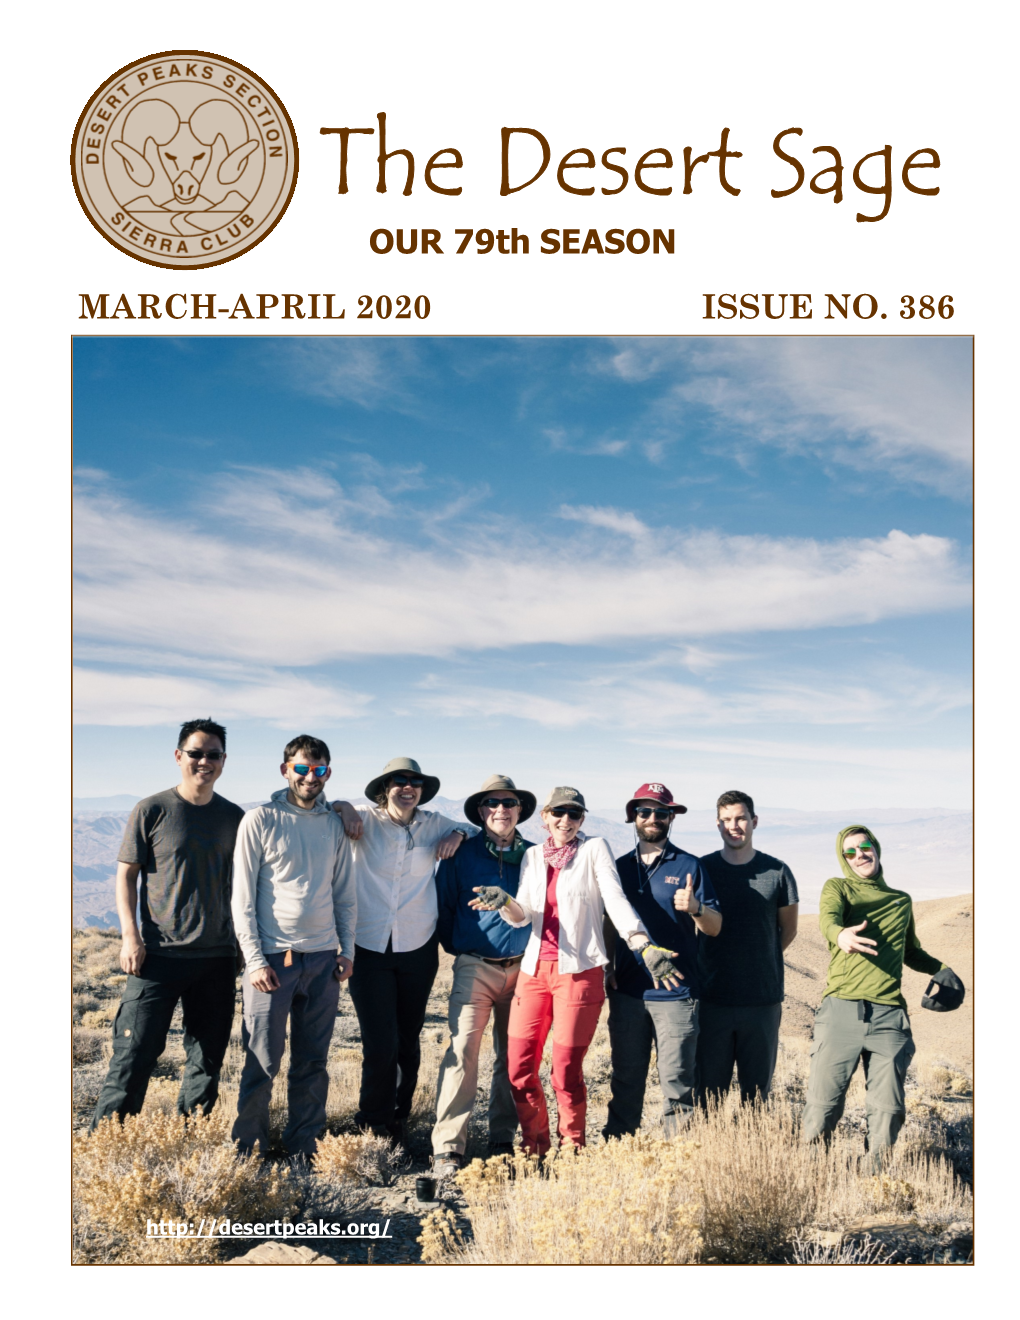 The Desert Sage OUR 79Th SEASON MARCH-APRIL 2020 ISSUE NO